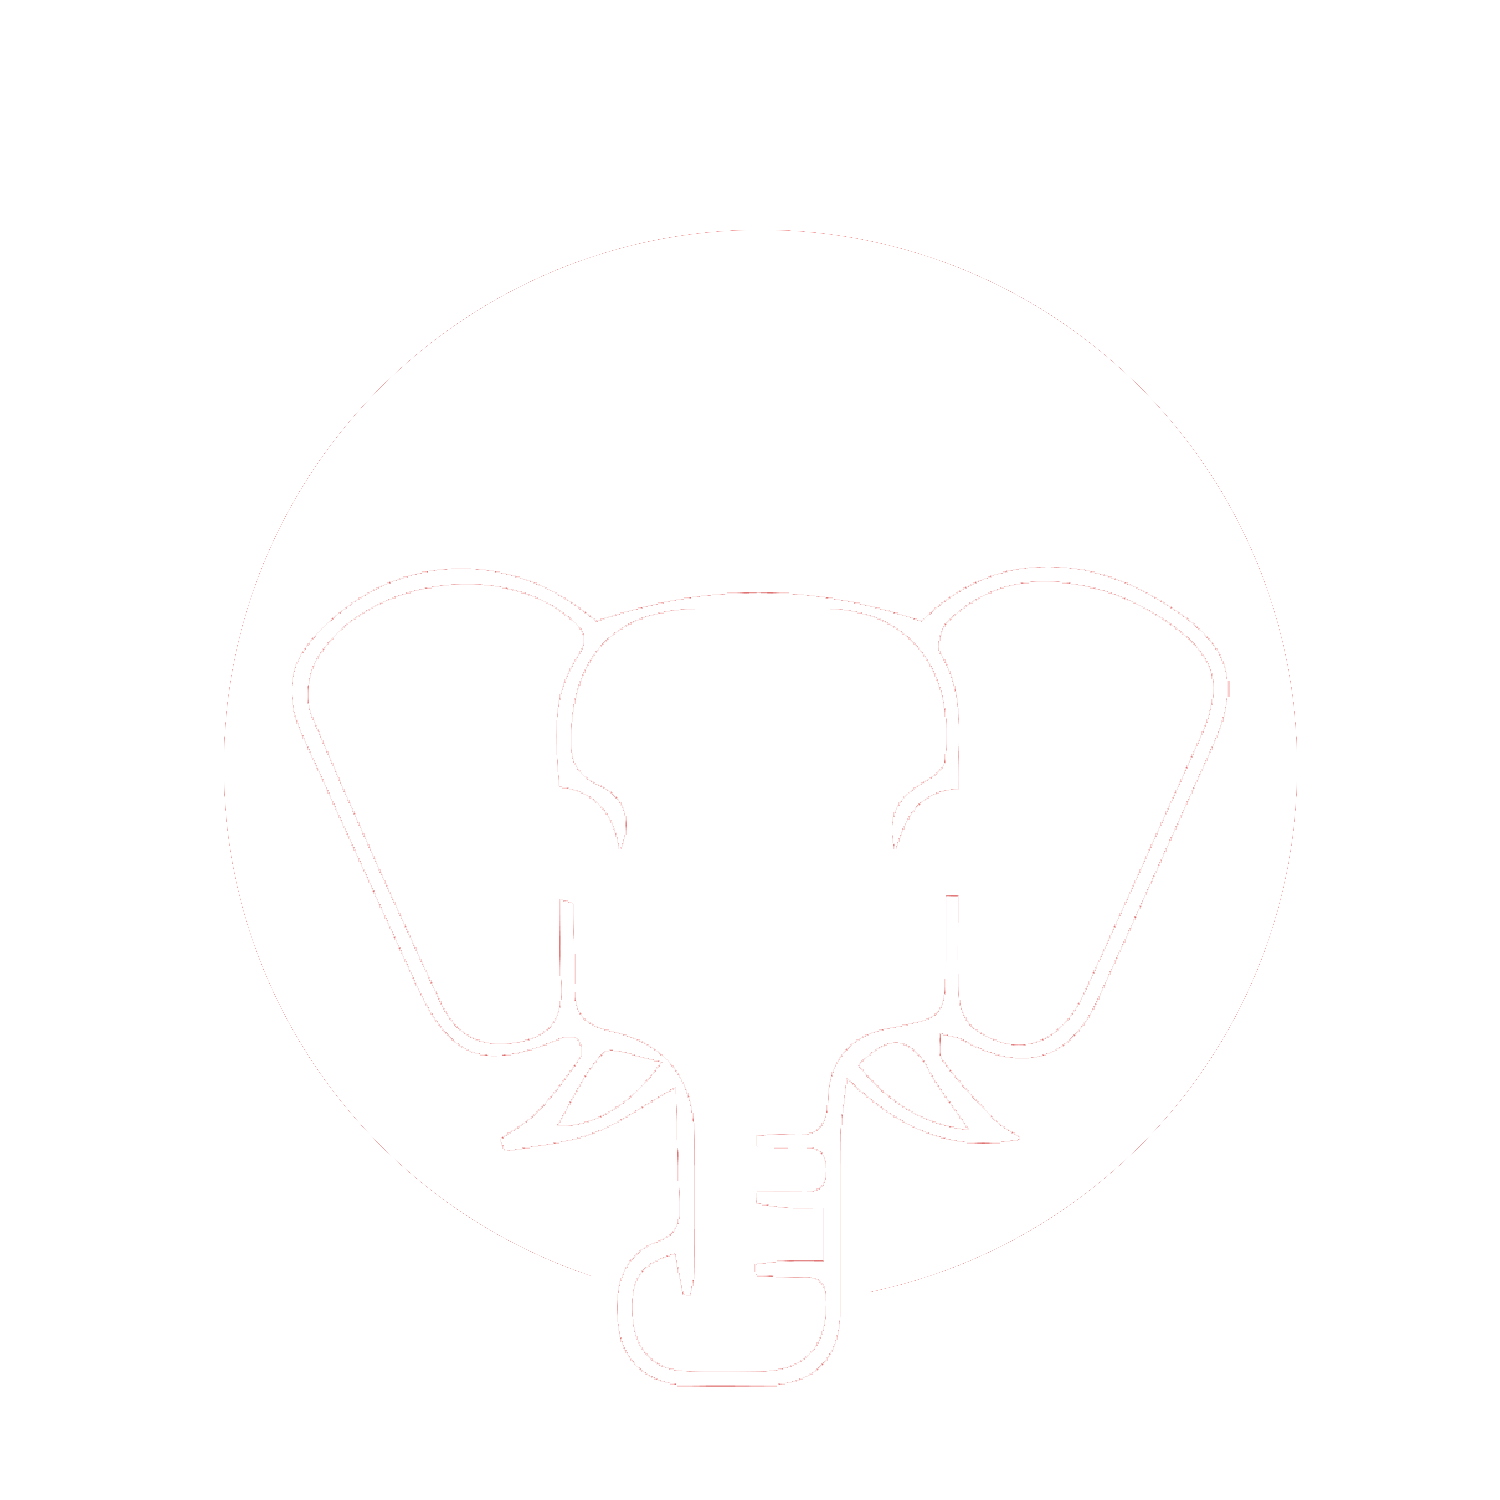 Allegheny County Council of Republican Women